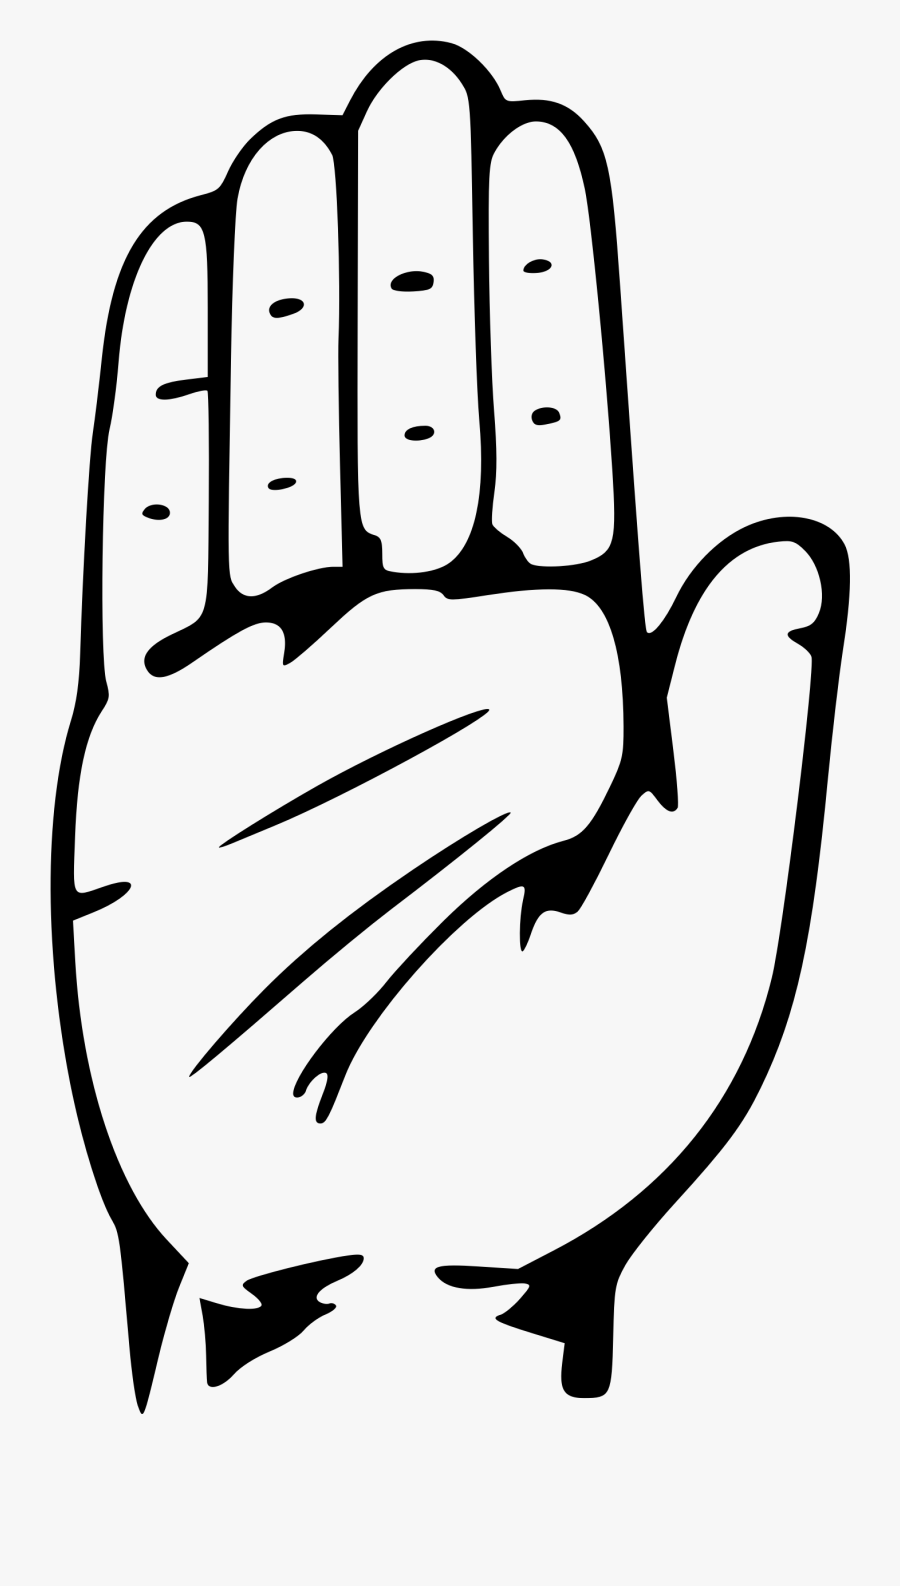 Closed Hand Clipart Free Clipart Image Image - Logo Indian National Congress, Transparent Clipart